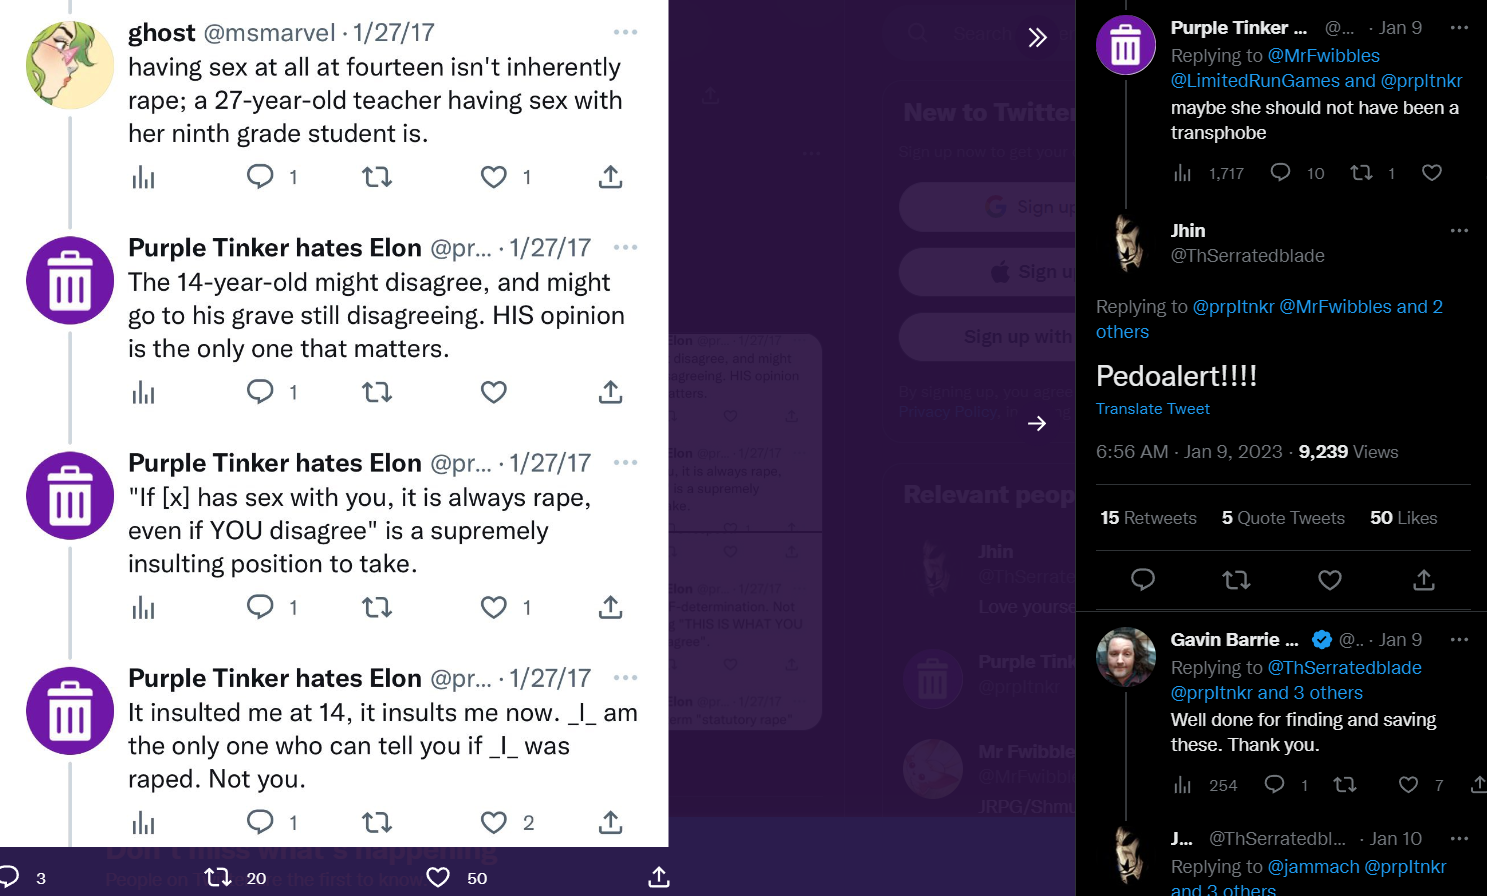 TheSerratedBlade shares alleged tweets of Purple Tinker seemingly advocating for pedophilia via Twitter